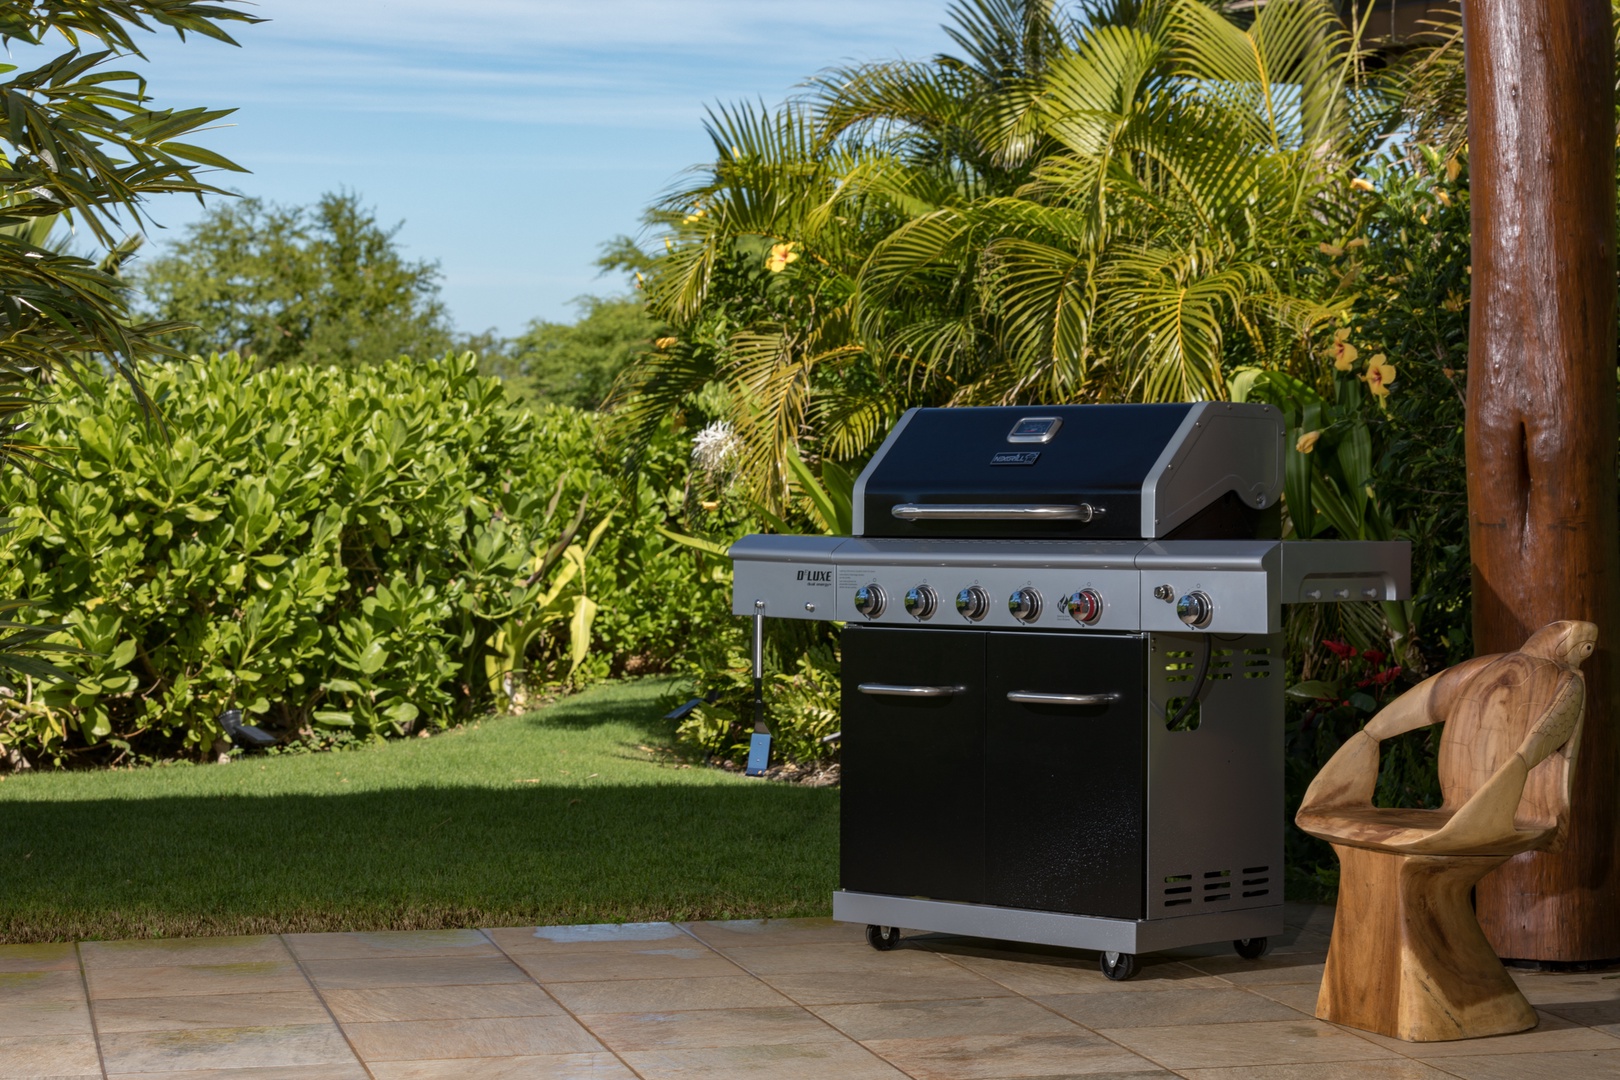 Kamuela Vacation Rentals, Mauna Lani KaMilo #407 - Prepare meals at home on the barbecue grill.